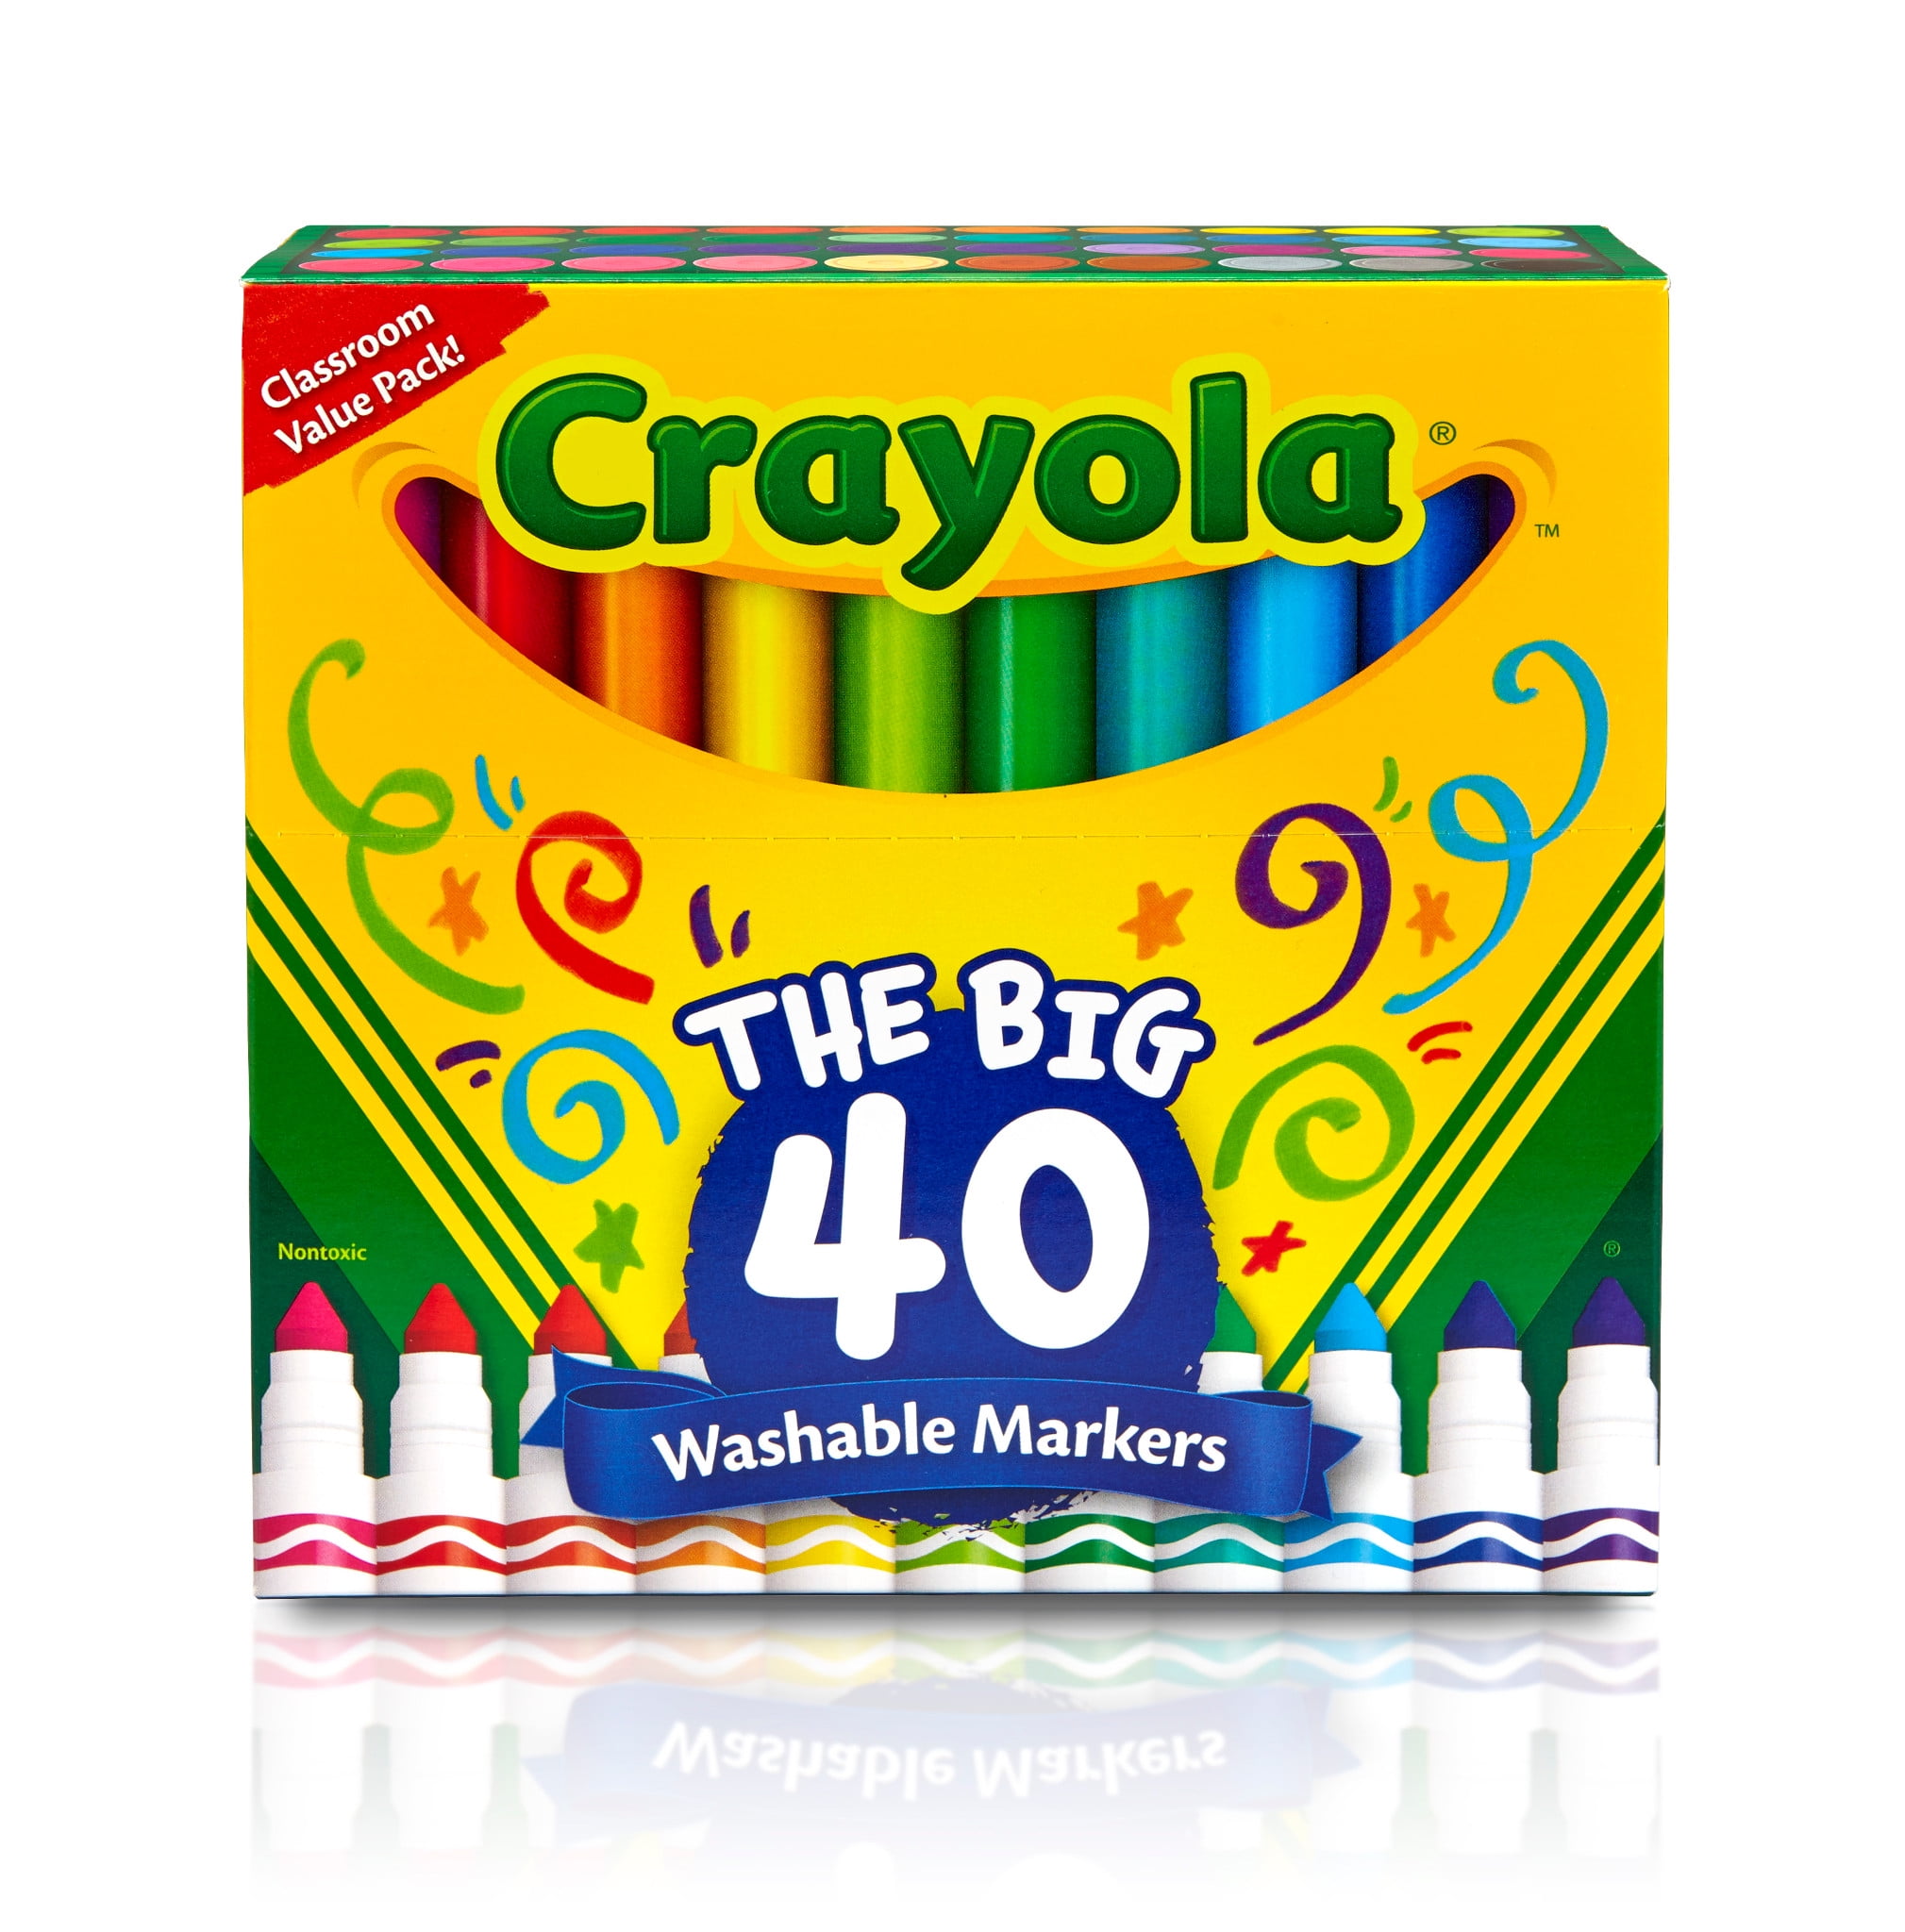 4 pack) Crayola Classic Thin Line Marker Set, 10 Ct, Multi Colors, Back to  School Supplies for Kids 